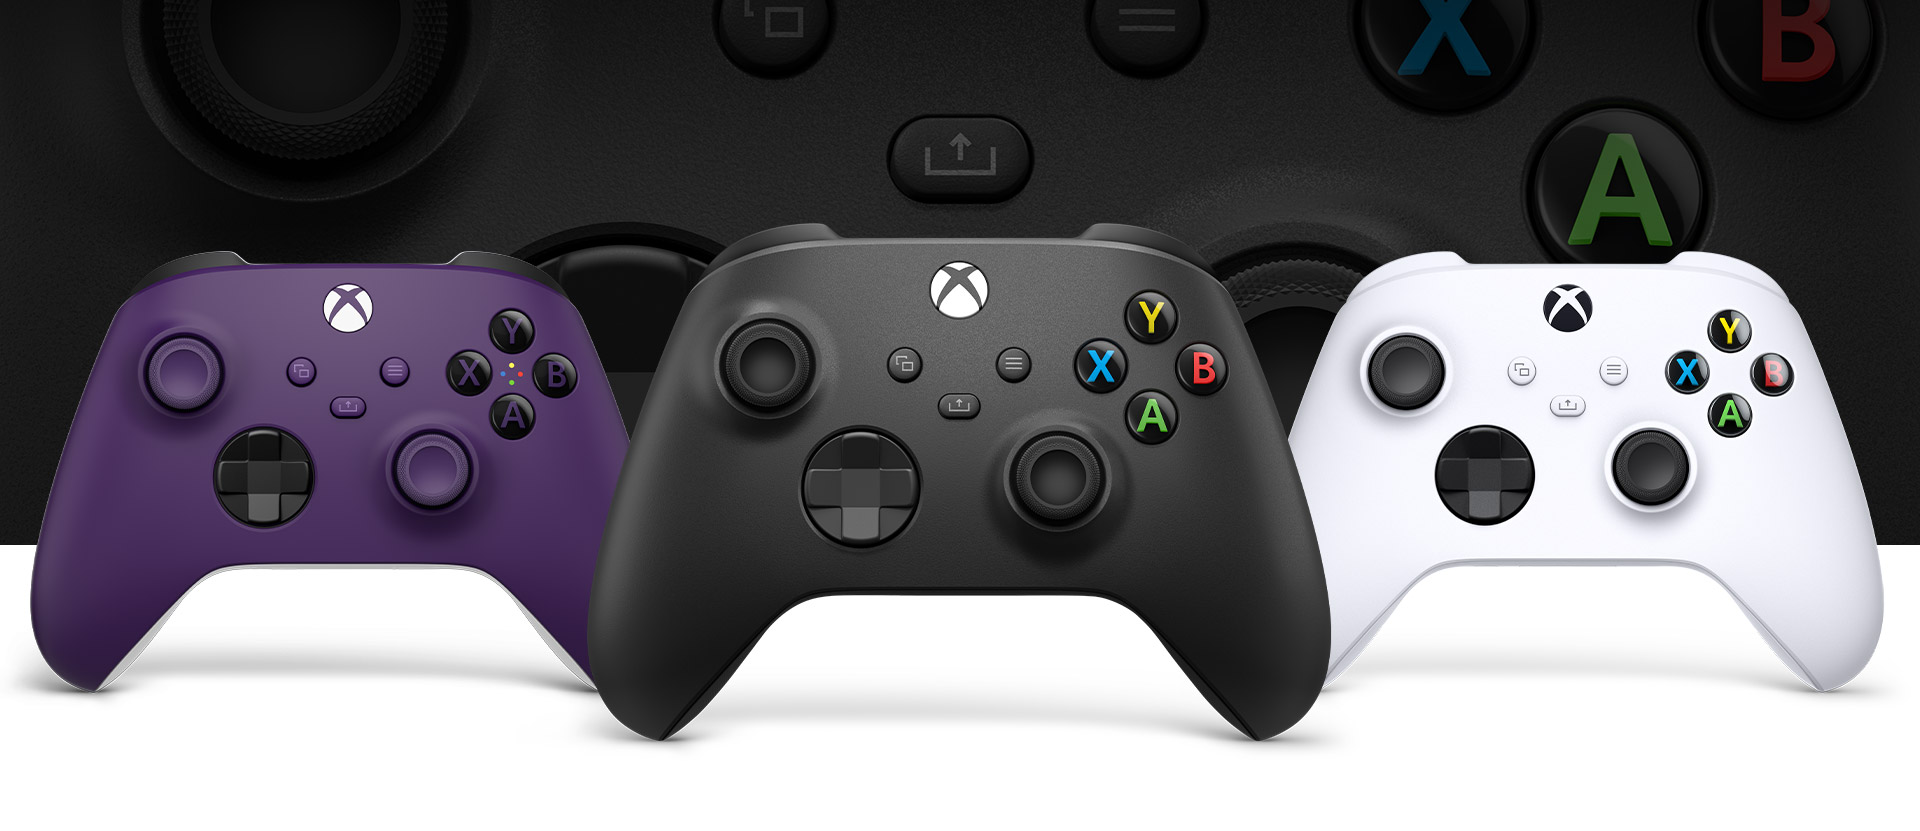 Xbox Carbon Black controller in front with Purple on left and Robot White on right